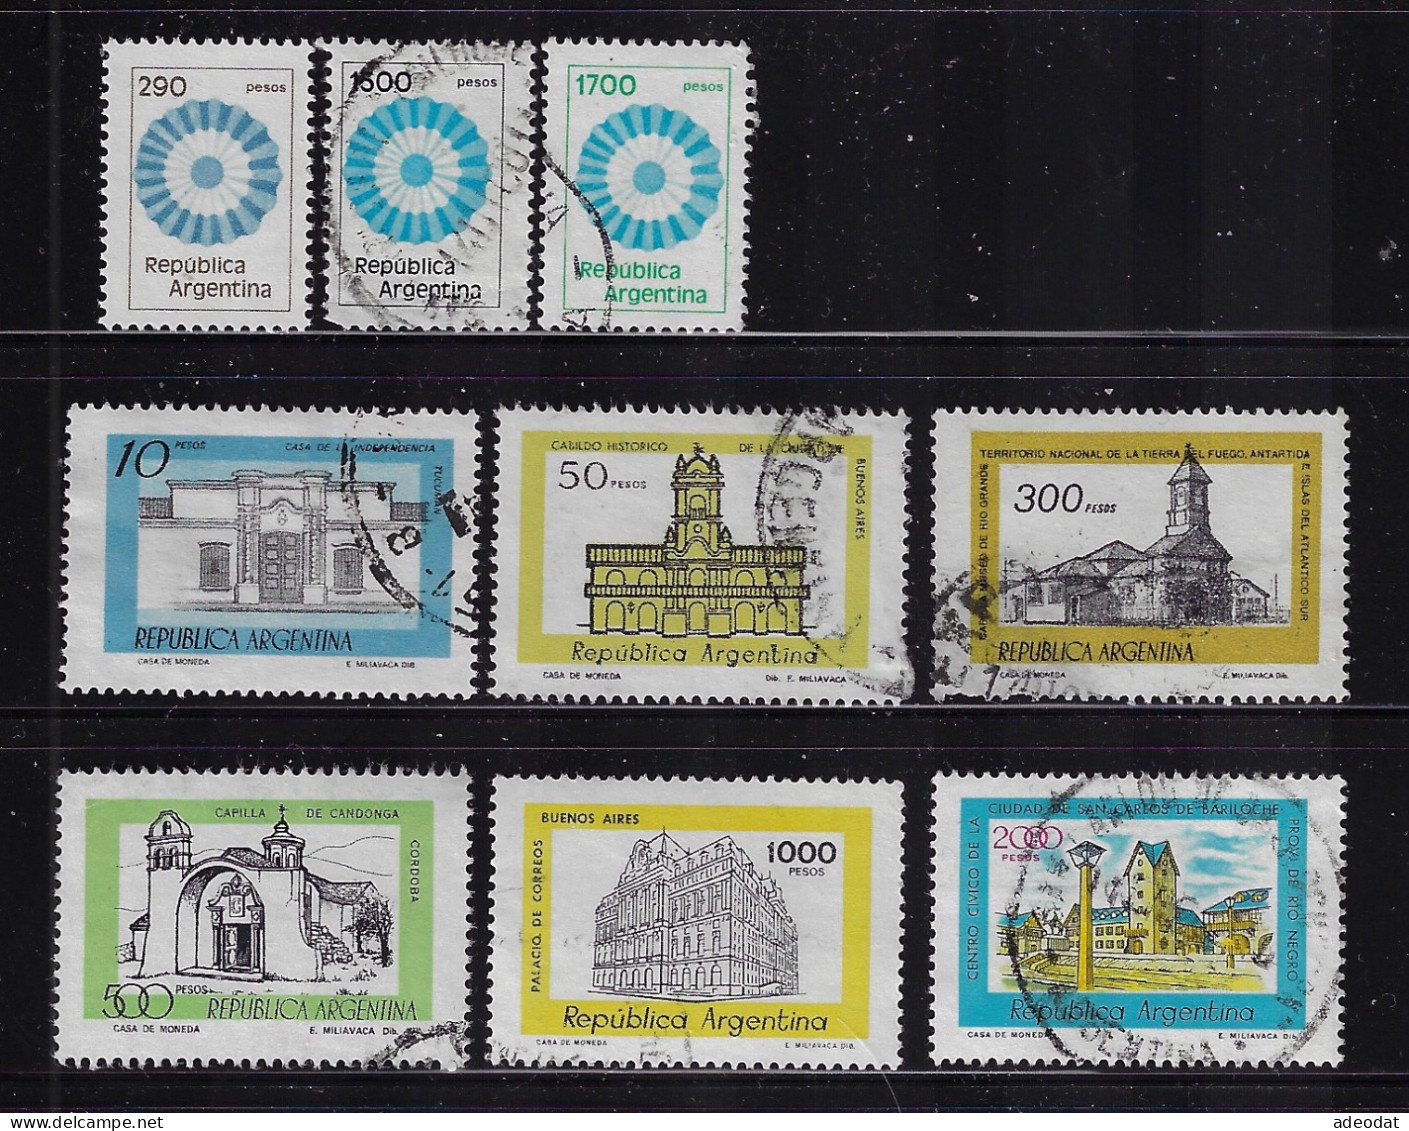 ARGENTINA  1977-78  SCOTT #1161...1178,1209...1218  9 STAMPS  USED - Used Stamps